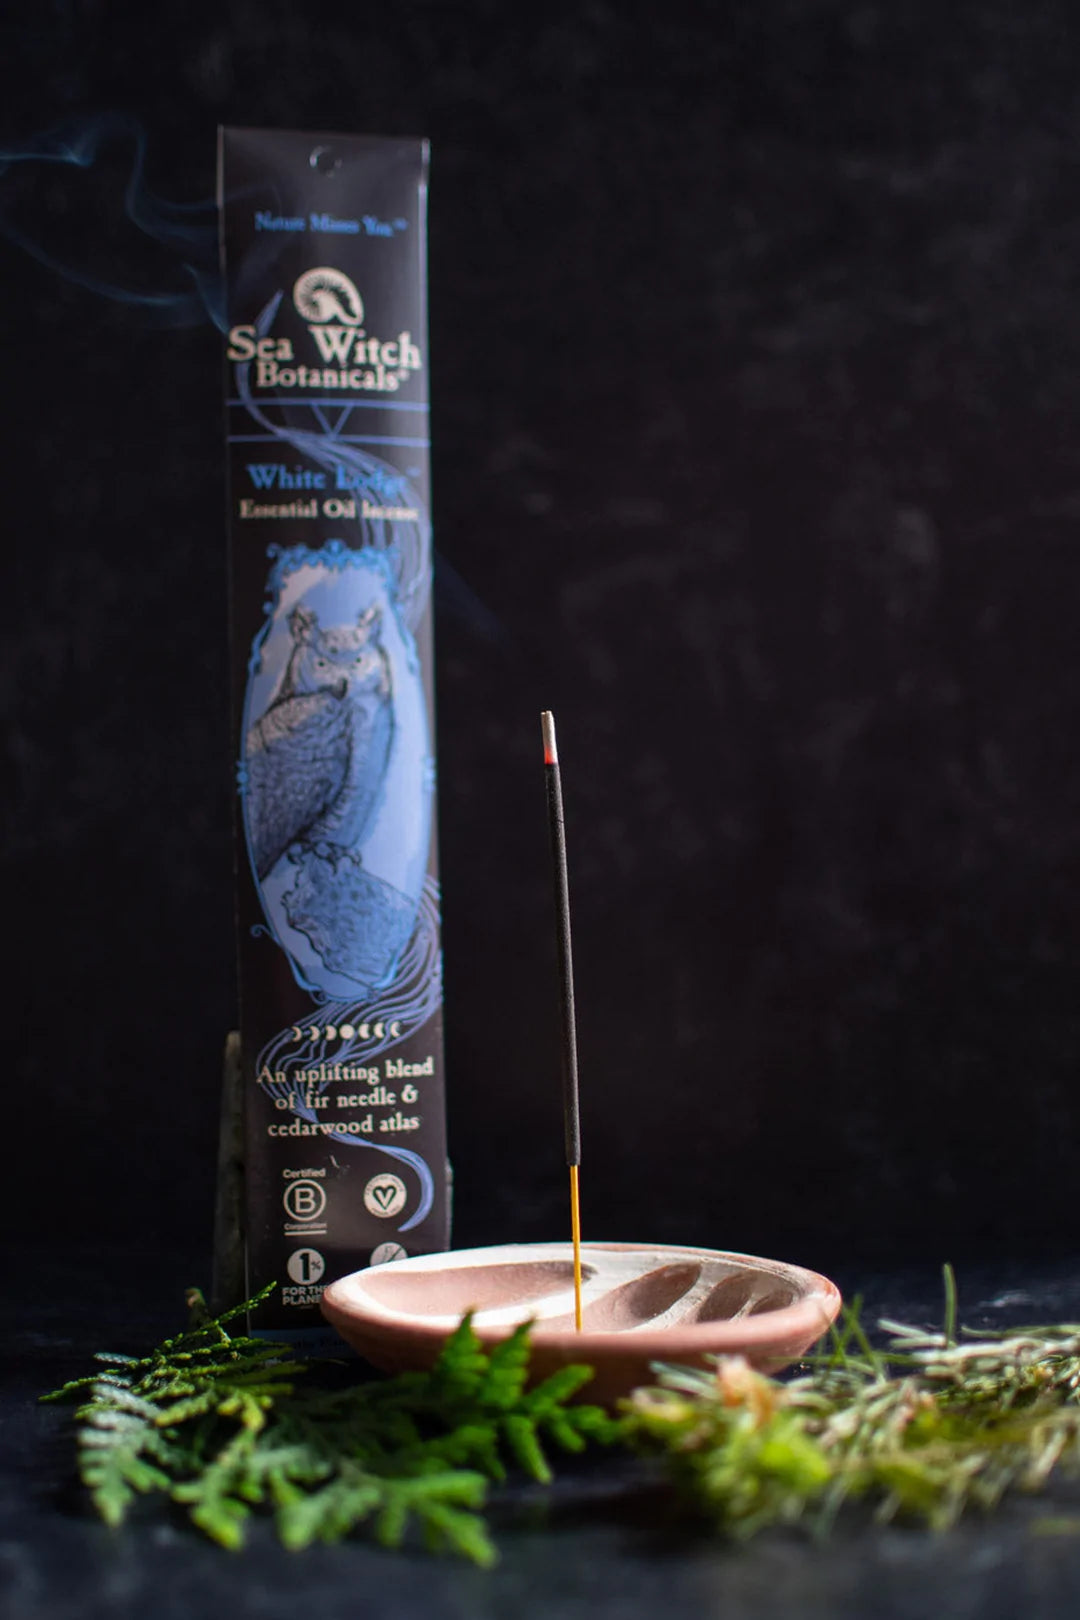 White Lodge Incense: With All-natural Cedarwood Atlas & Fir Needle Essential Oils